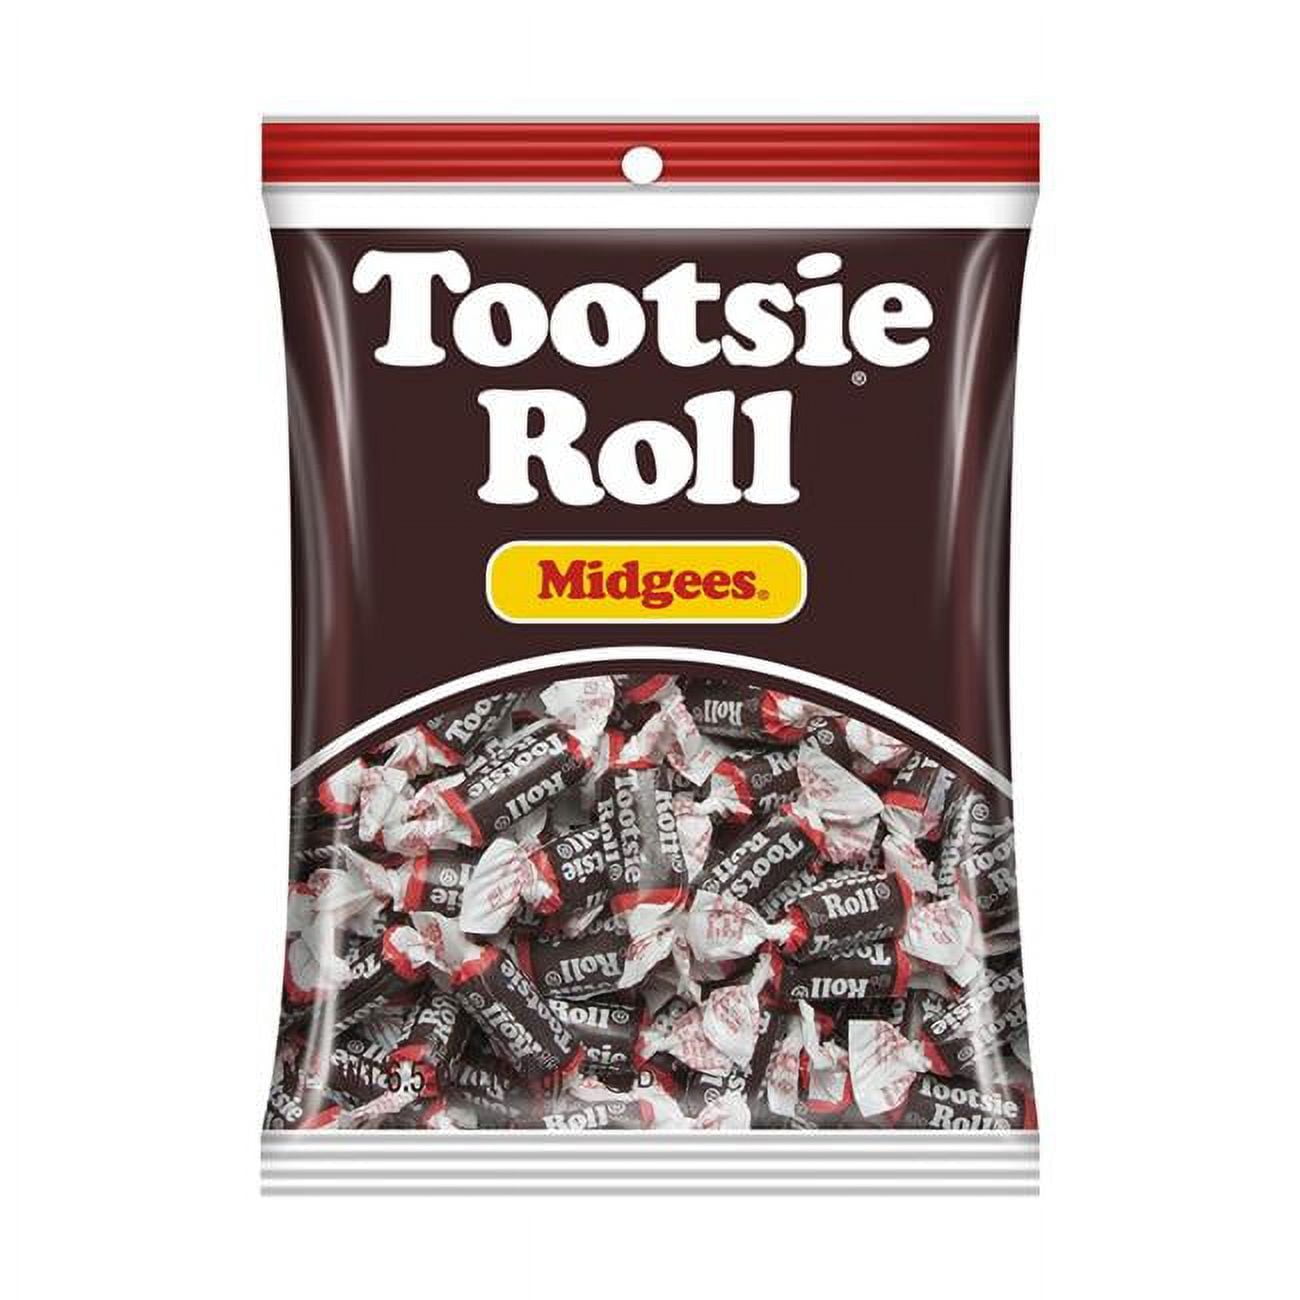 Picture of Tootsie 9422148 6.5 oz Roll Midgees Chocolate Candy- pack of 12